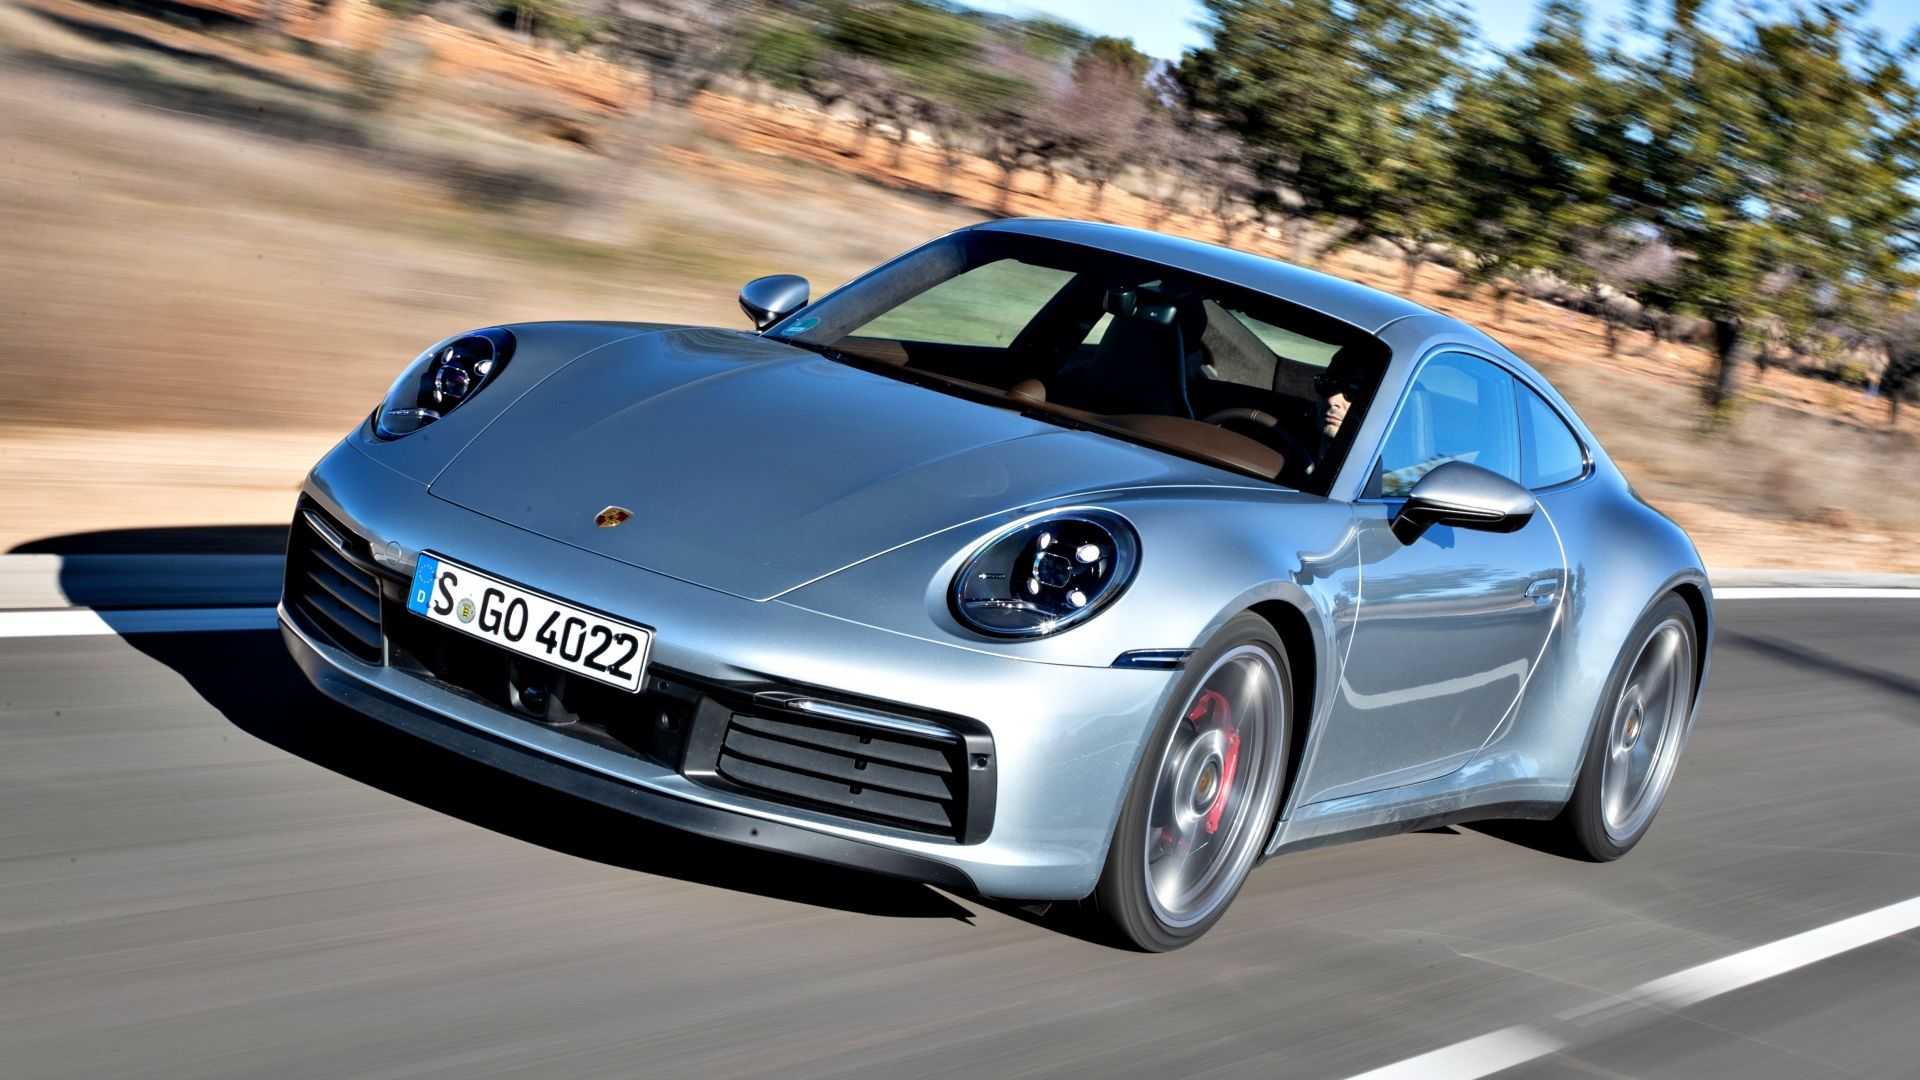 2020 Porsche 911 Carrera S Review: Still One of the Best on the Road